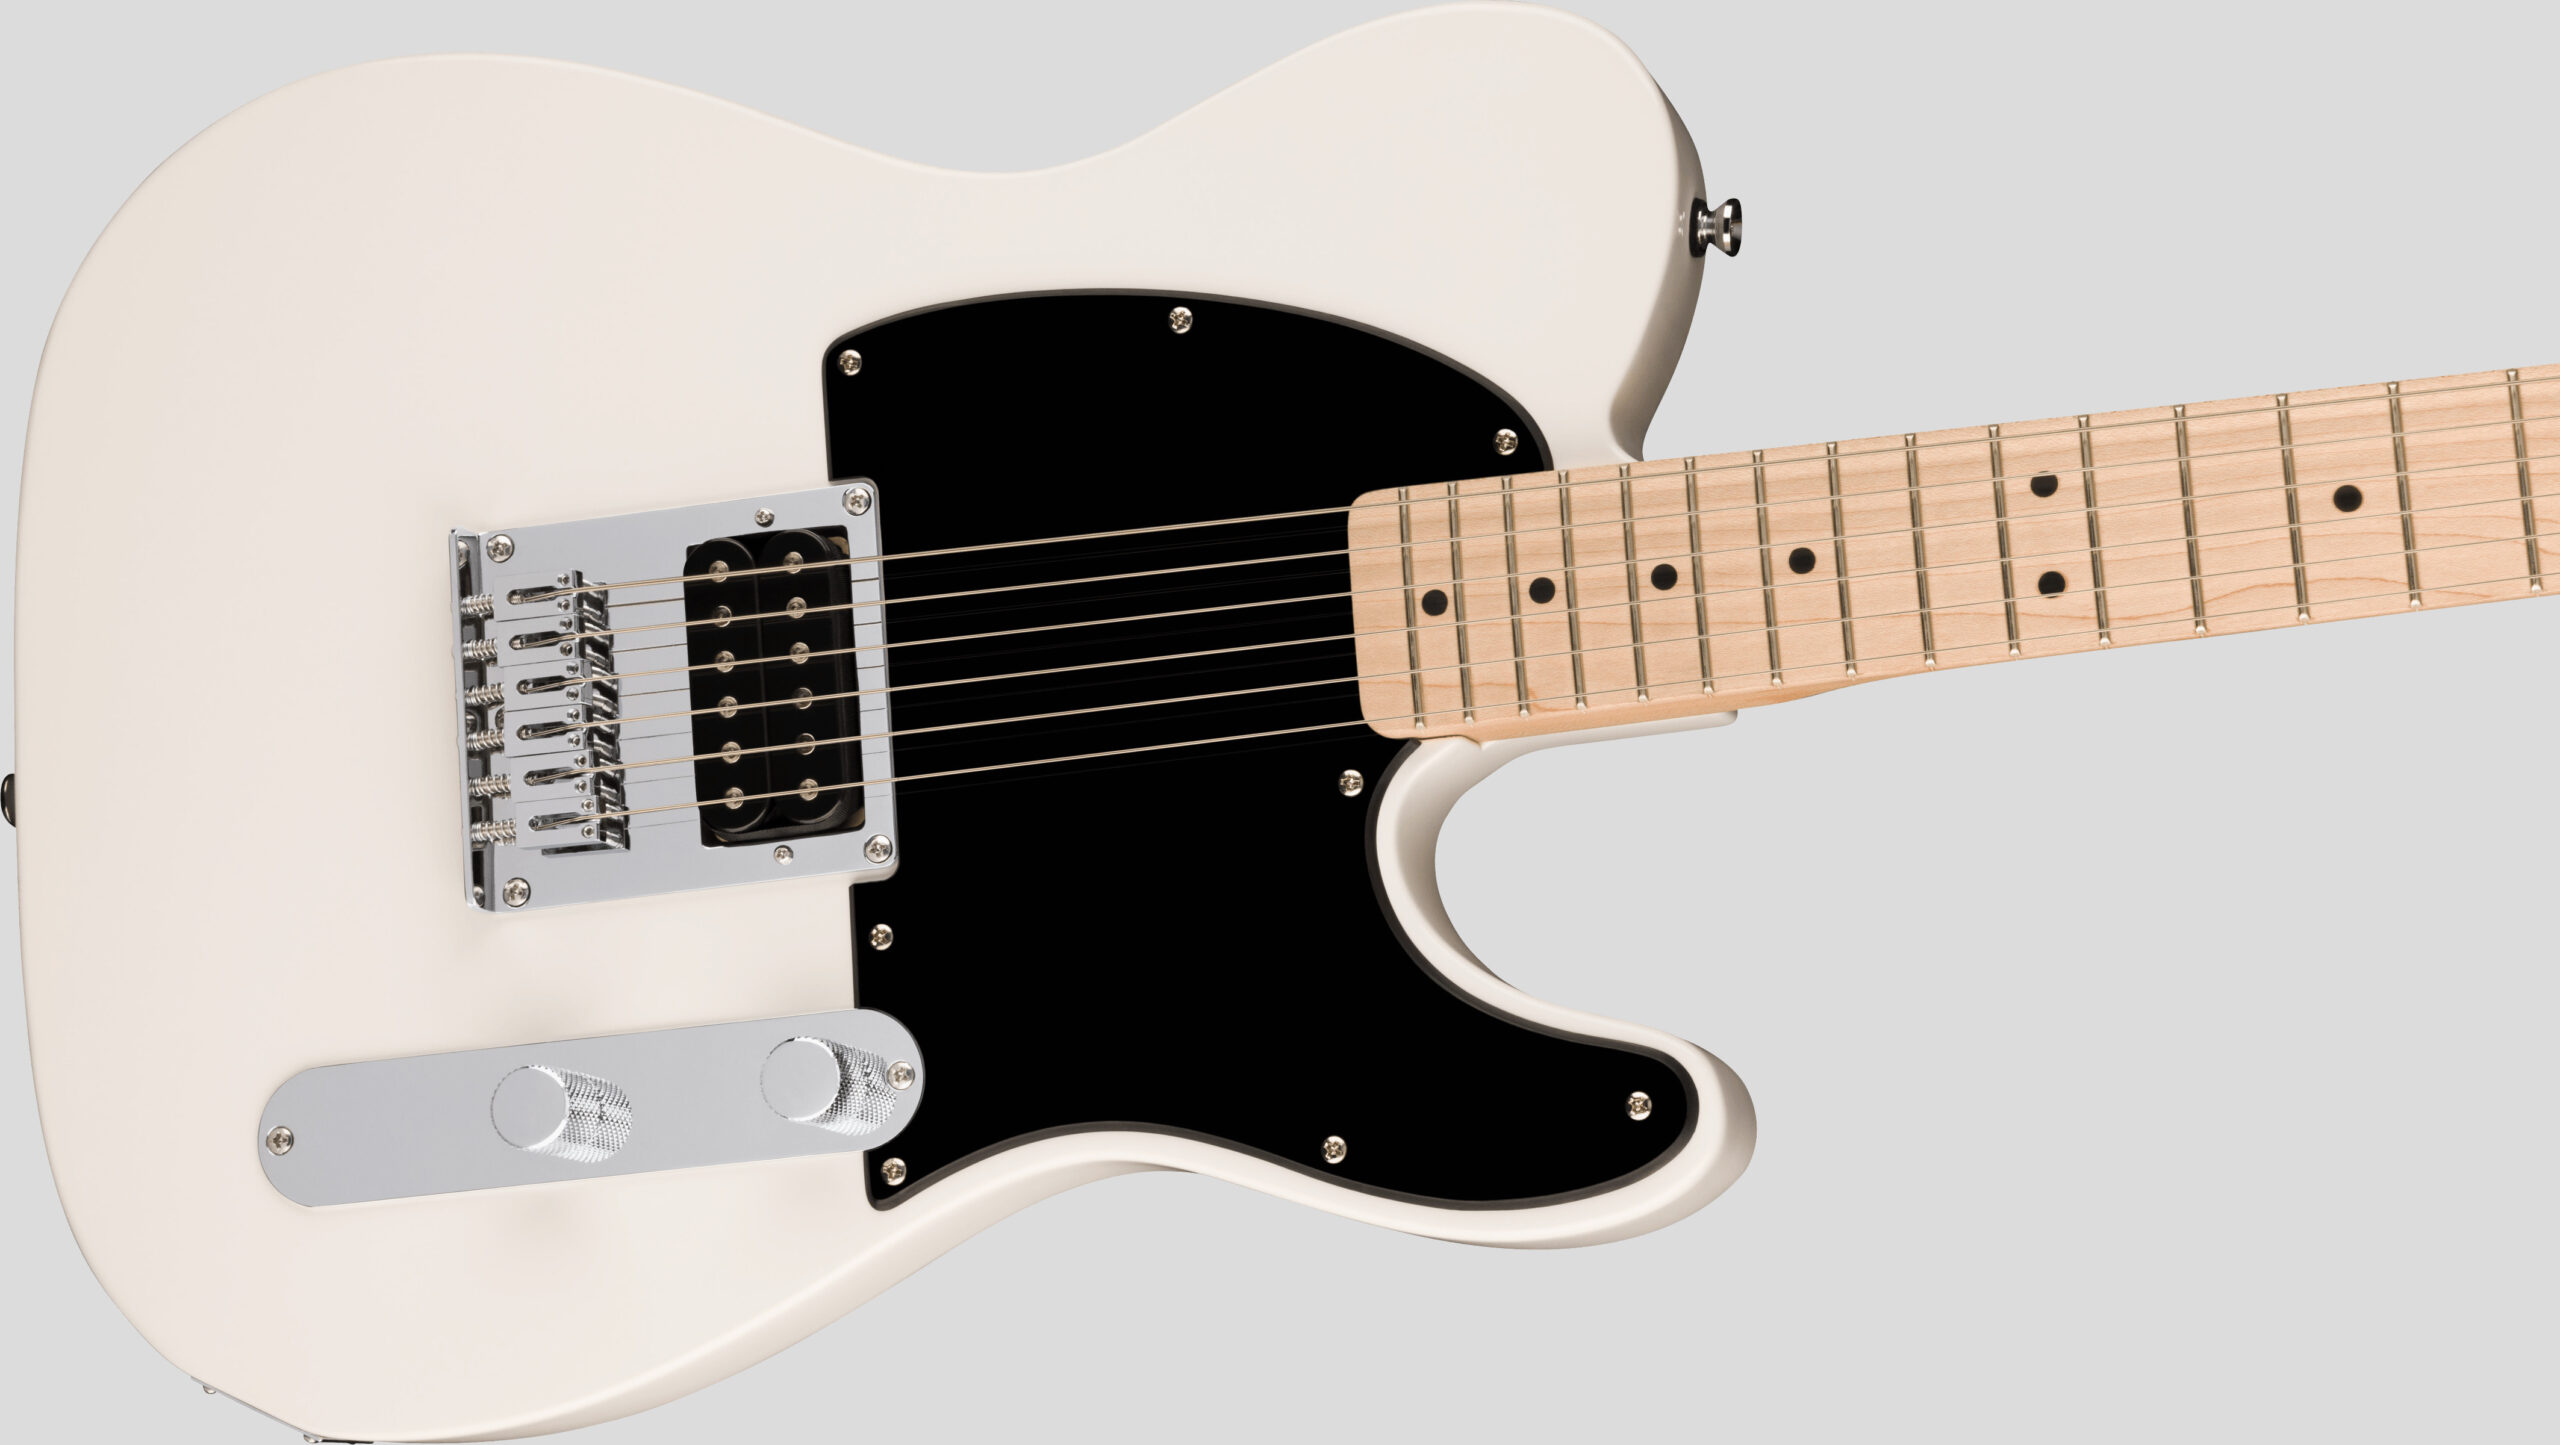 Squier by Fender Sonic Esquire H Arctic White 3